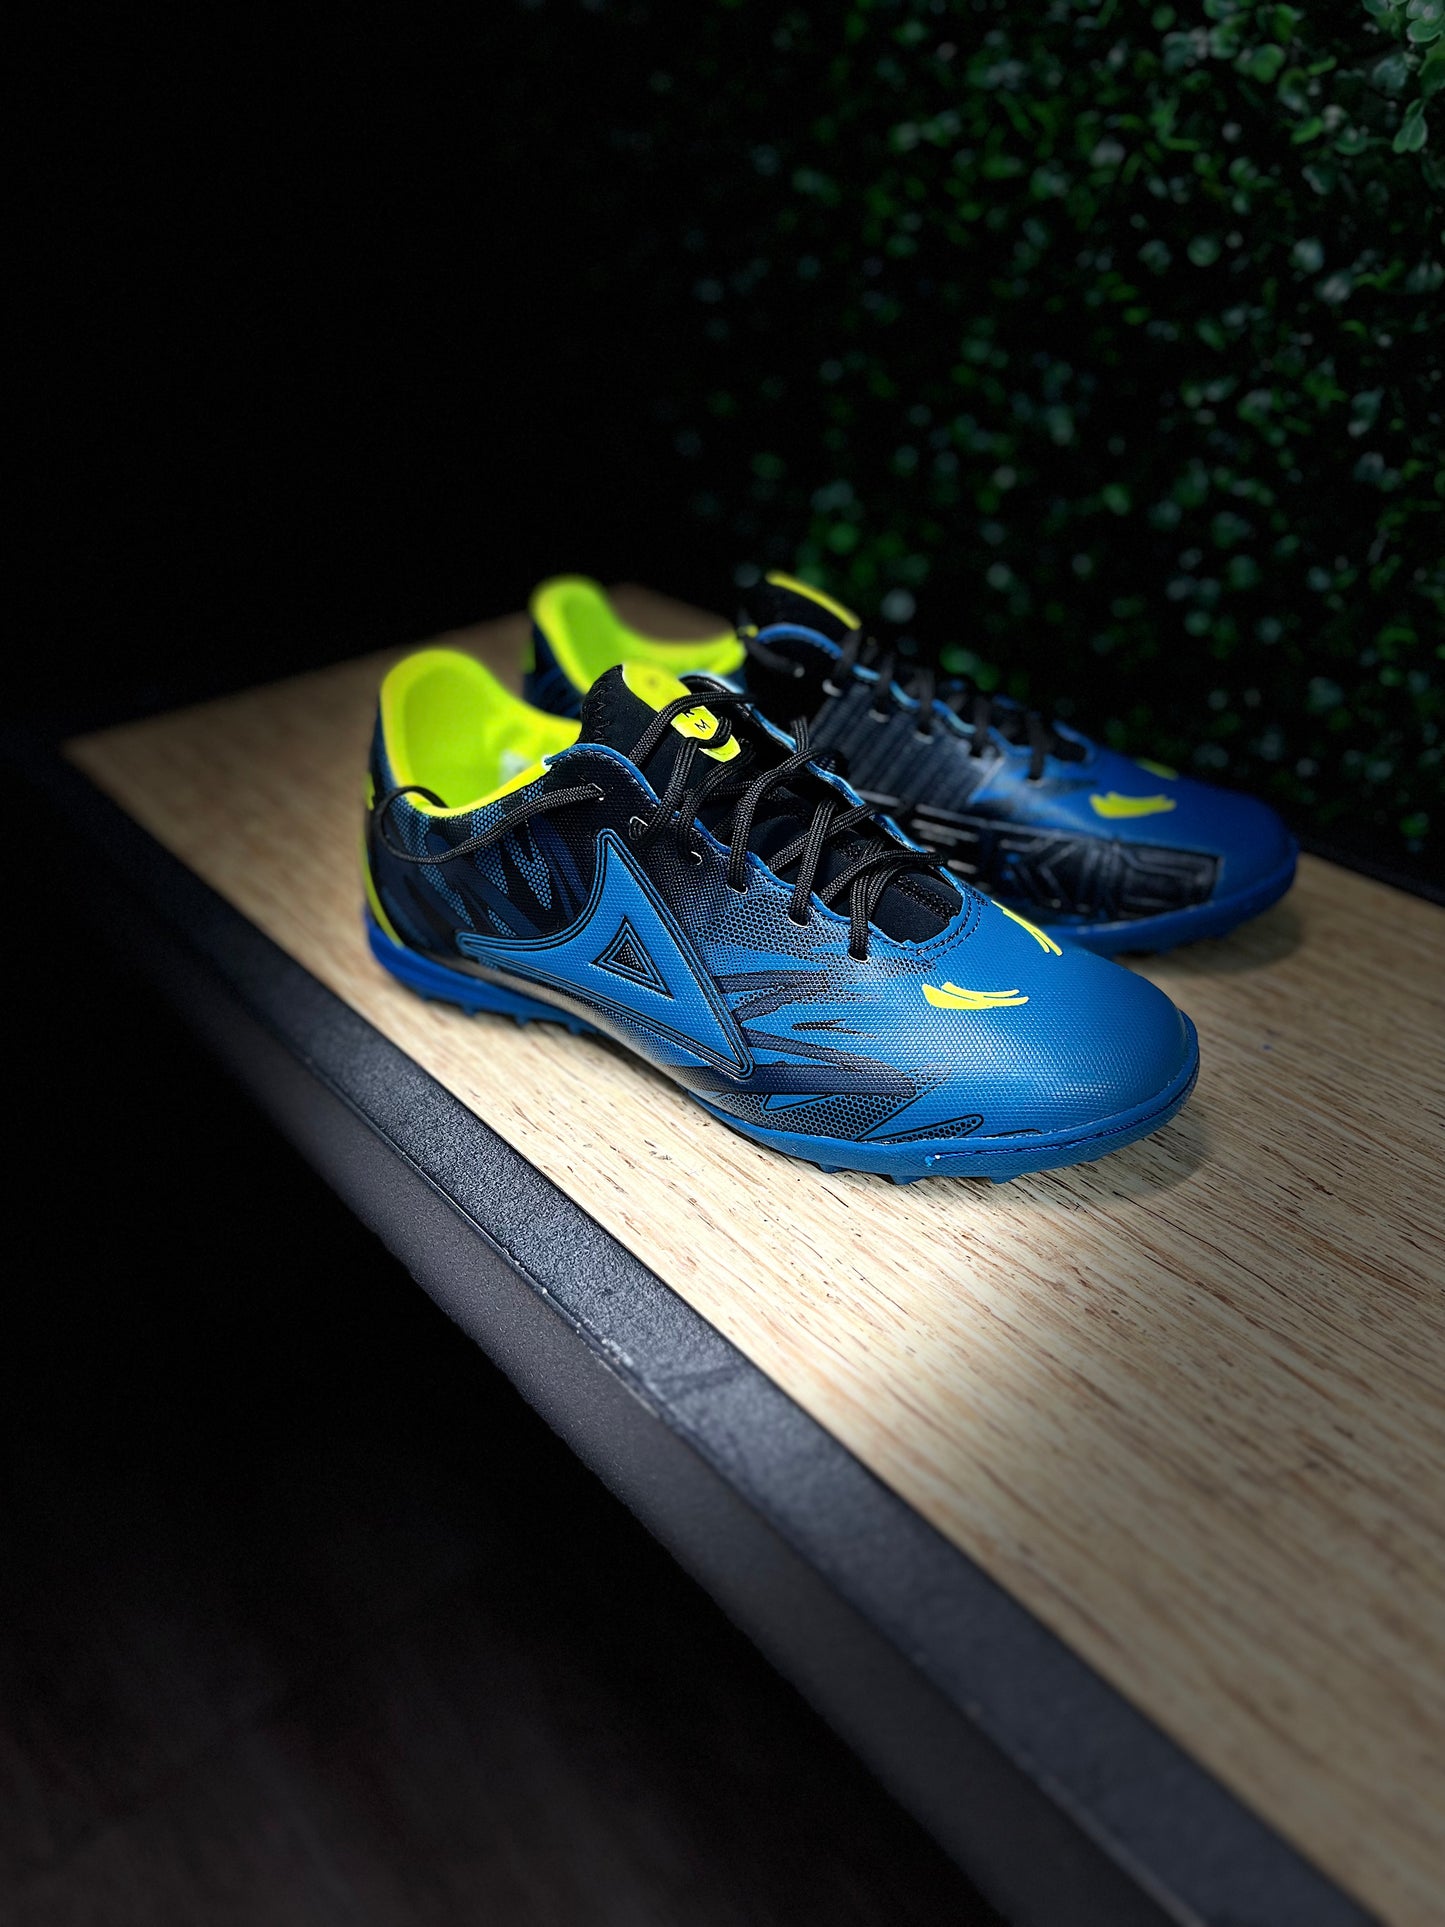 BLUE AND BLACK SOCCER SHOES